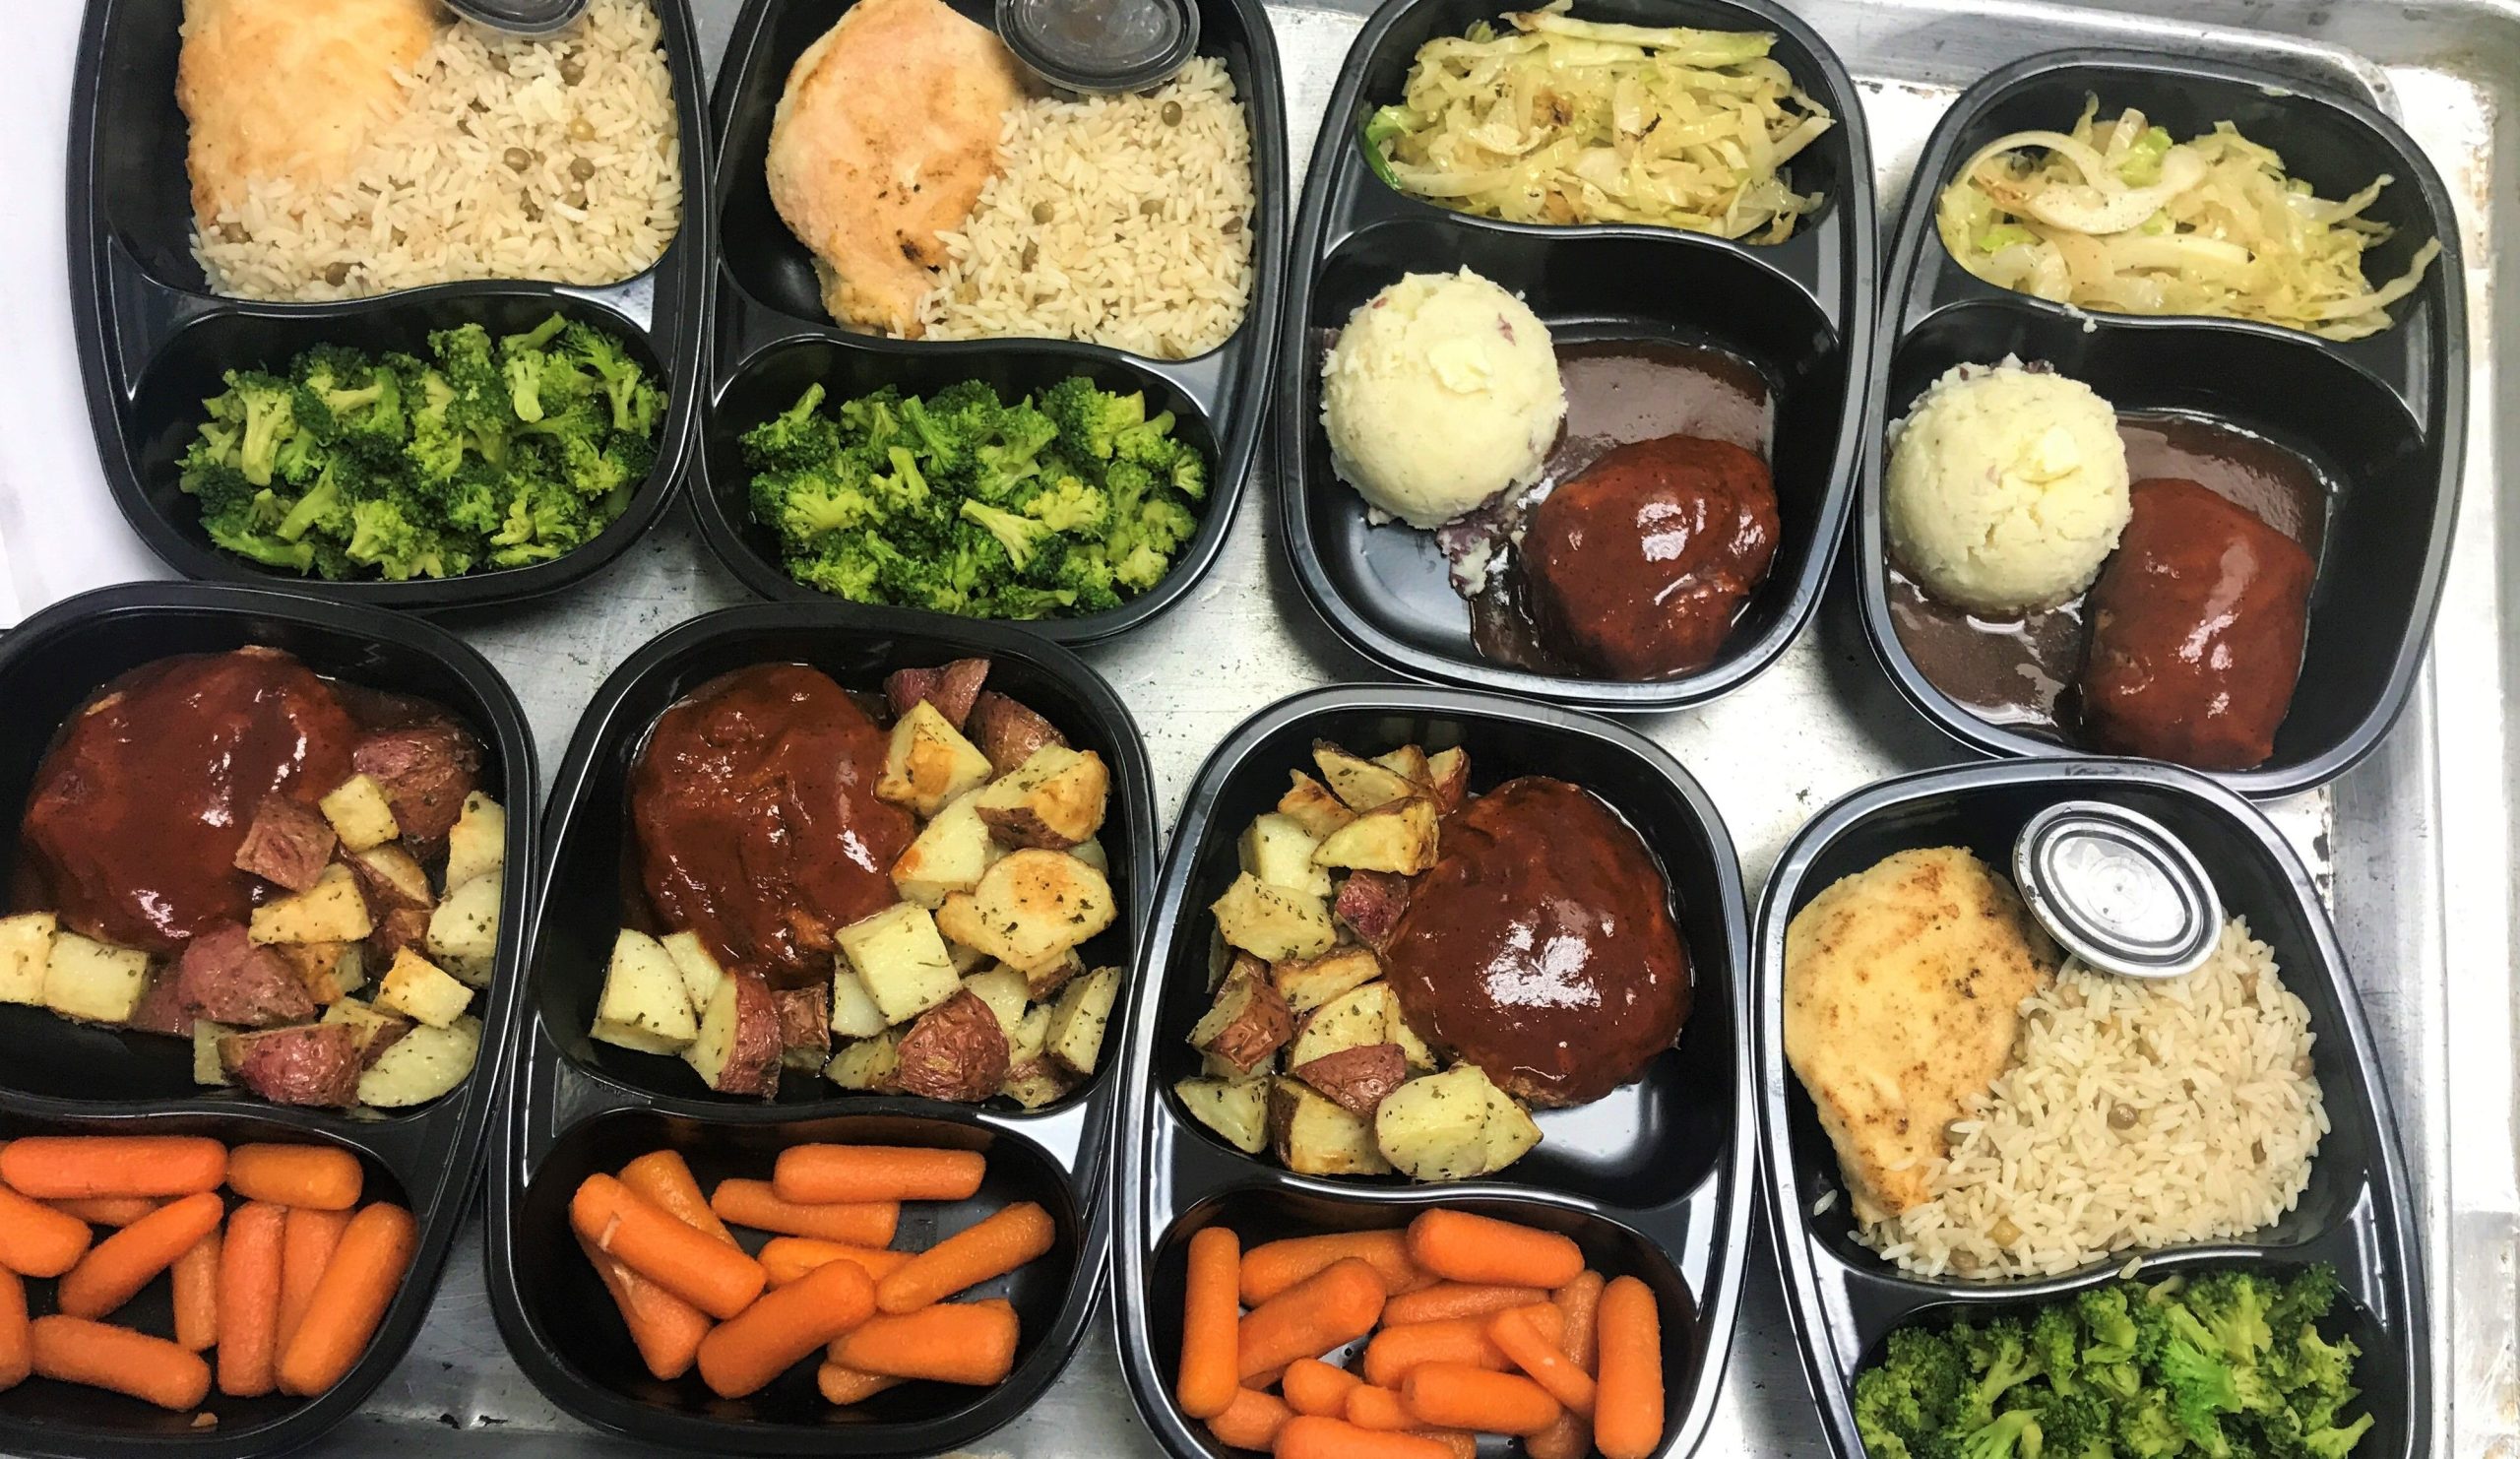 homemade ready meals delivered